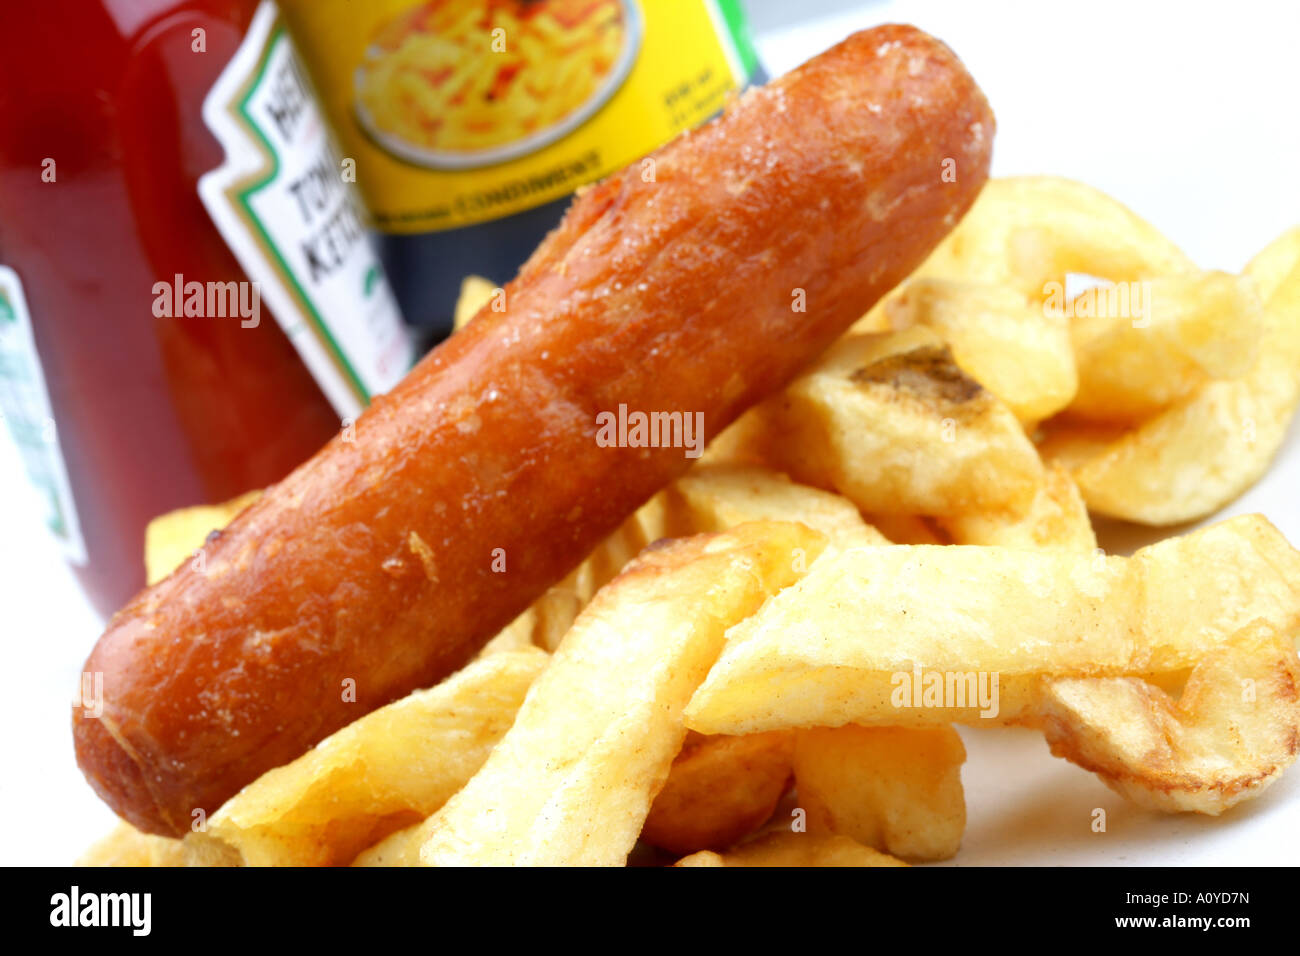 Sausage and Chips Stock Photo